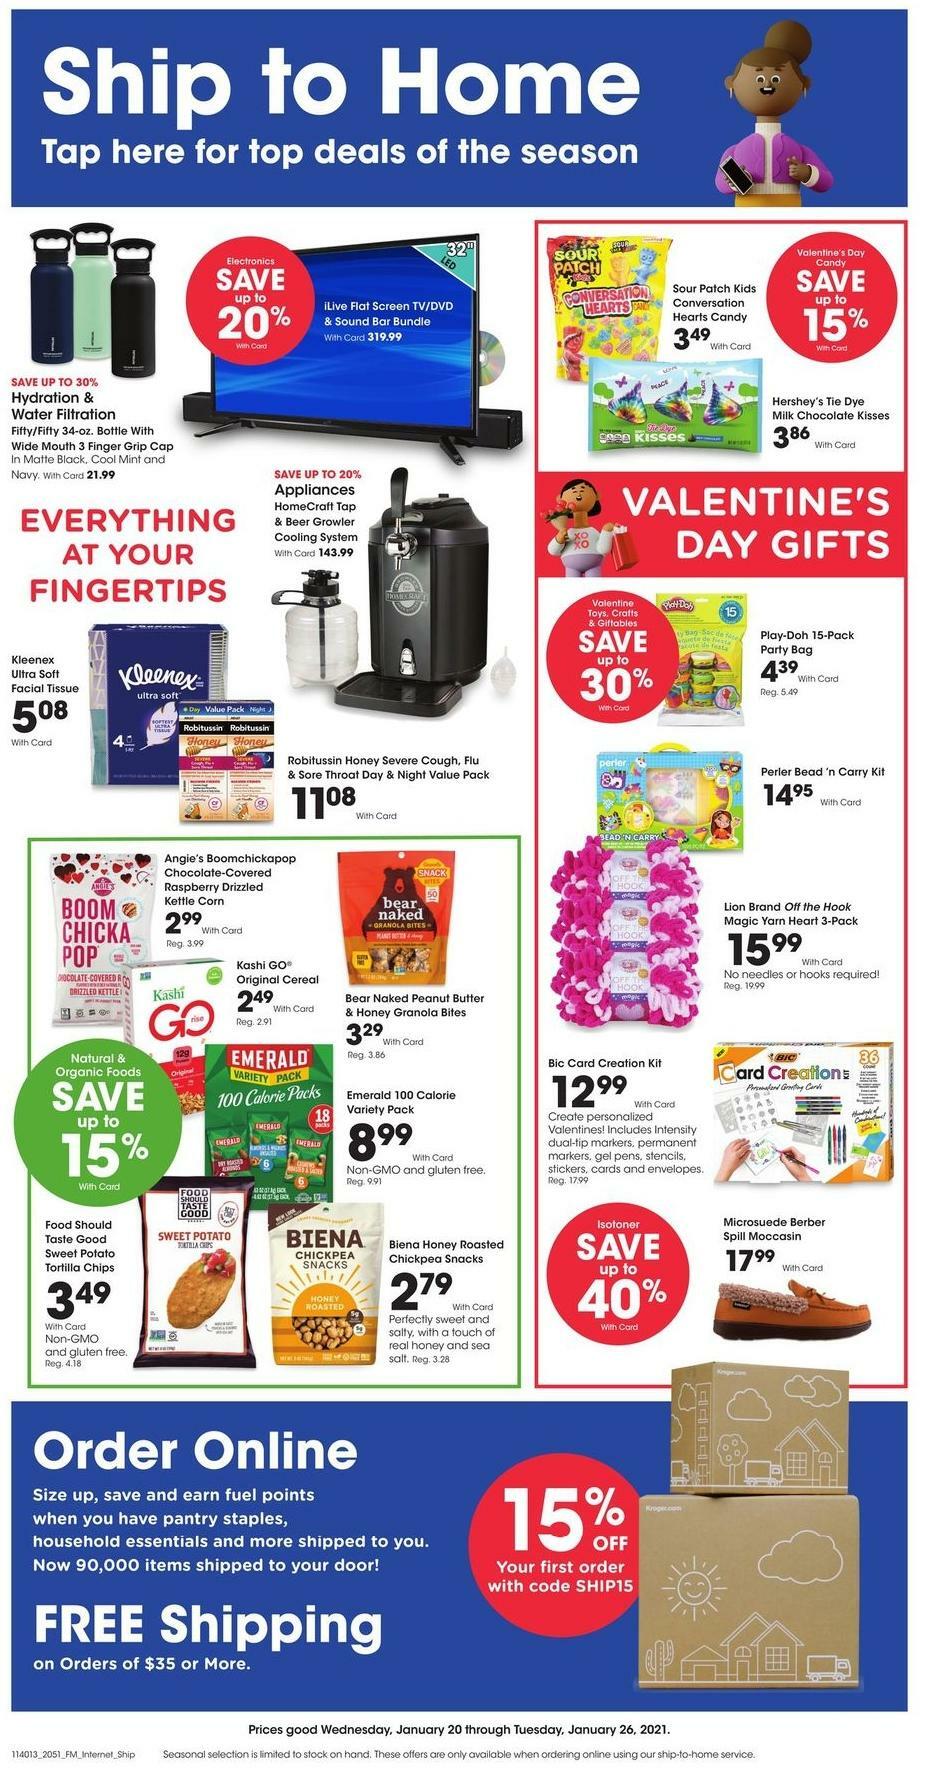 Fred Meyer Ship to Home Weekly Ad from January 20